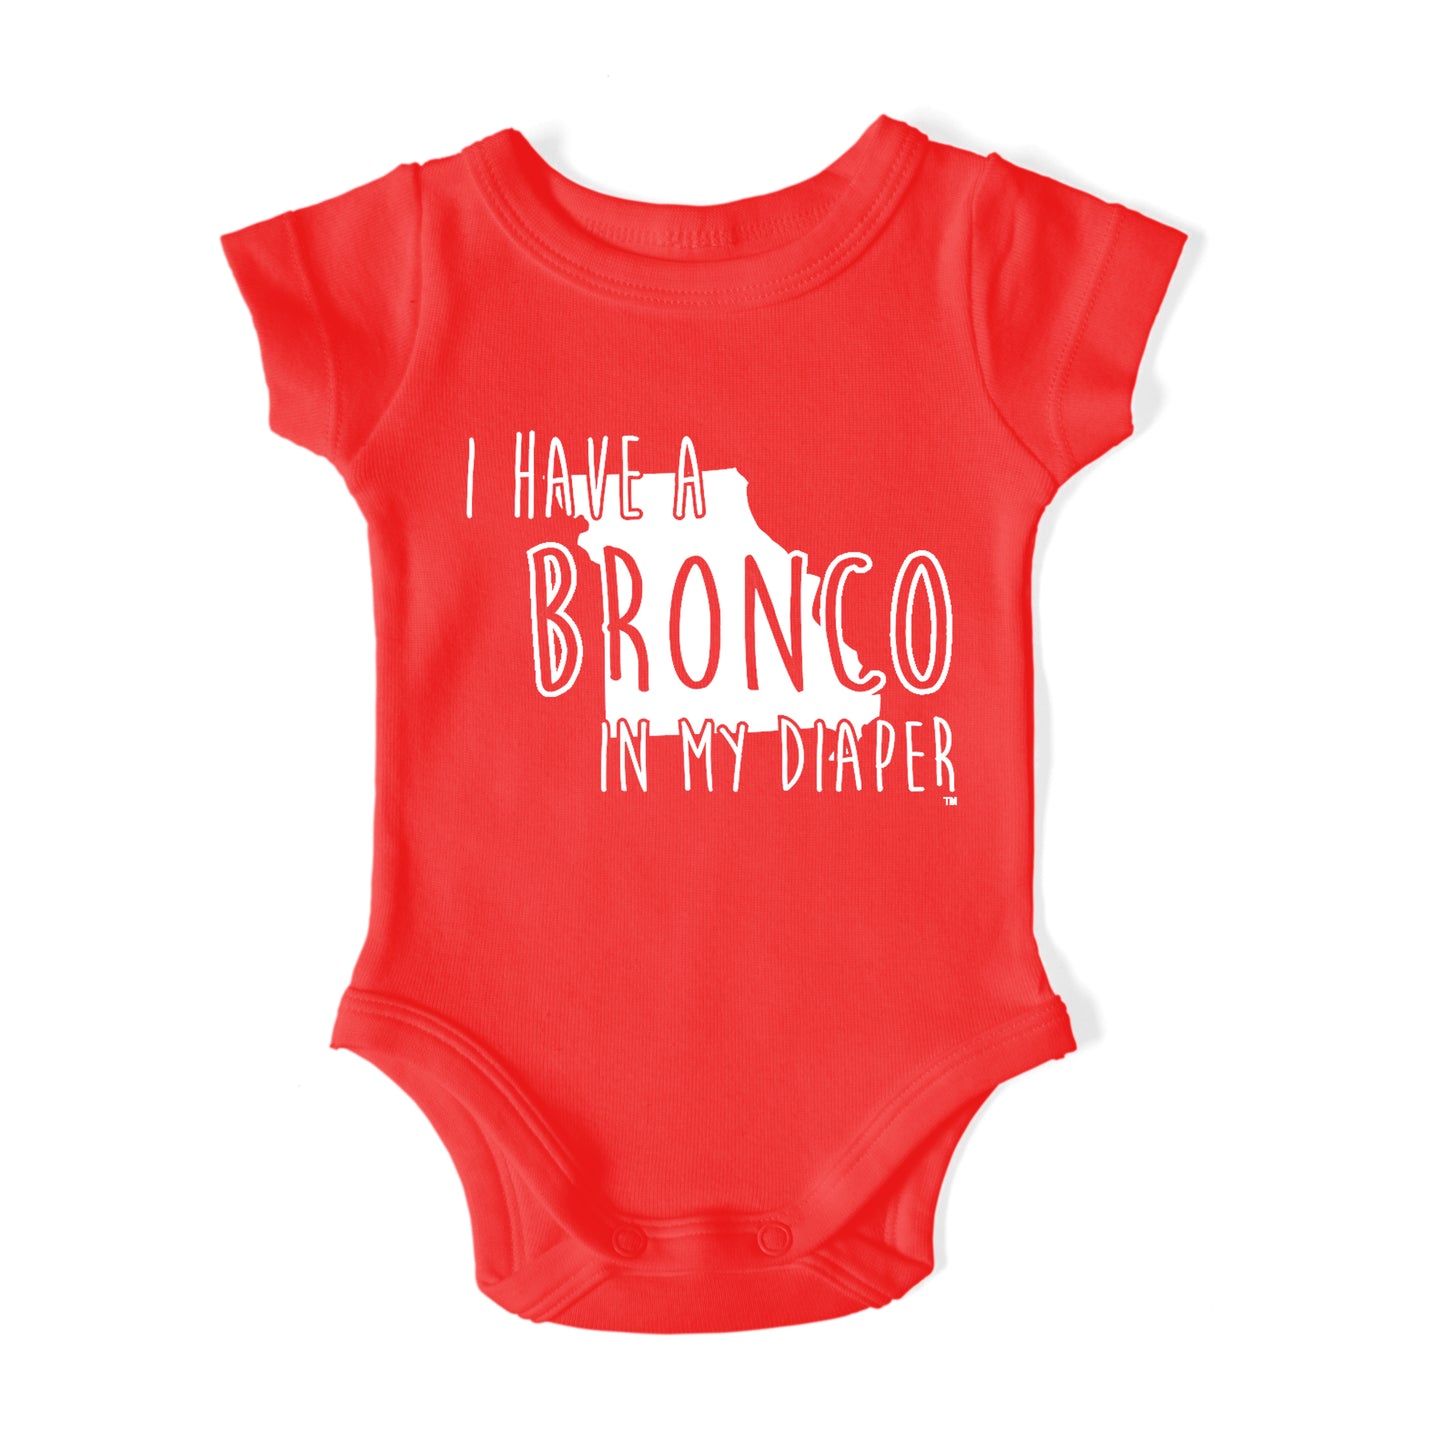 I HAVE A BRONCO IN MY DIAPER Baby One Piece